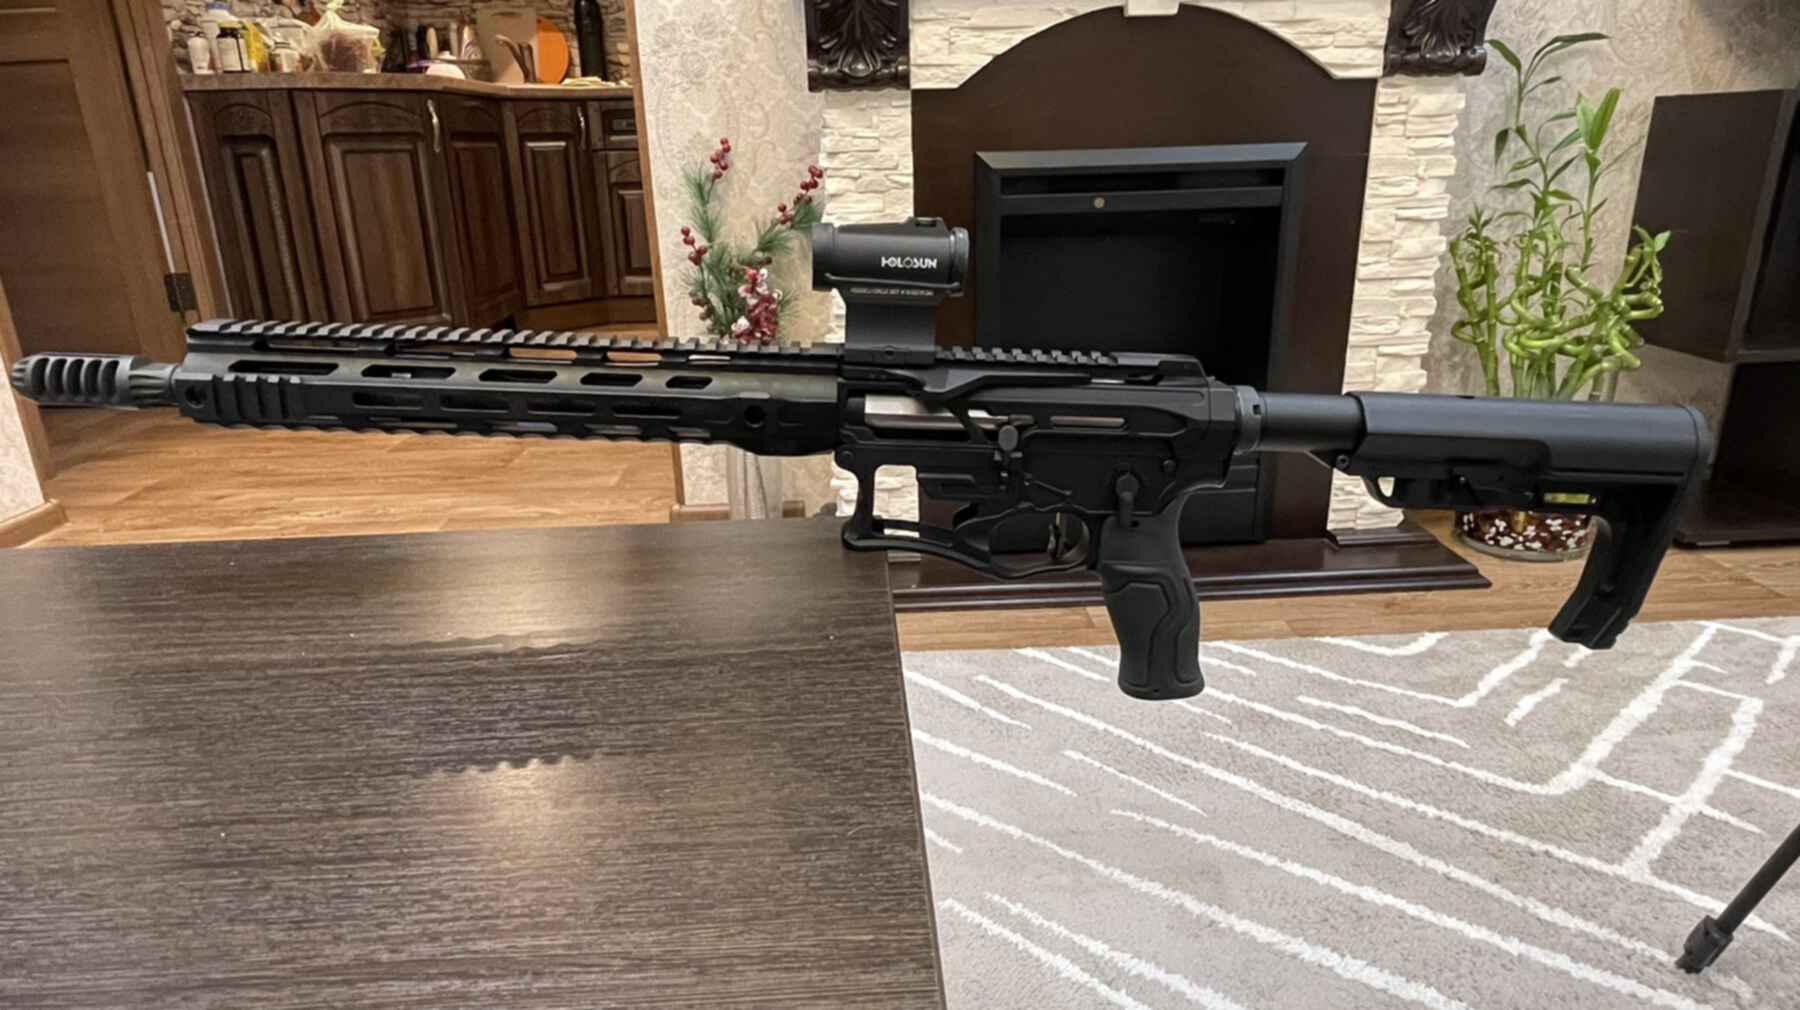 Owner of dick's shows destroyed ar-15s